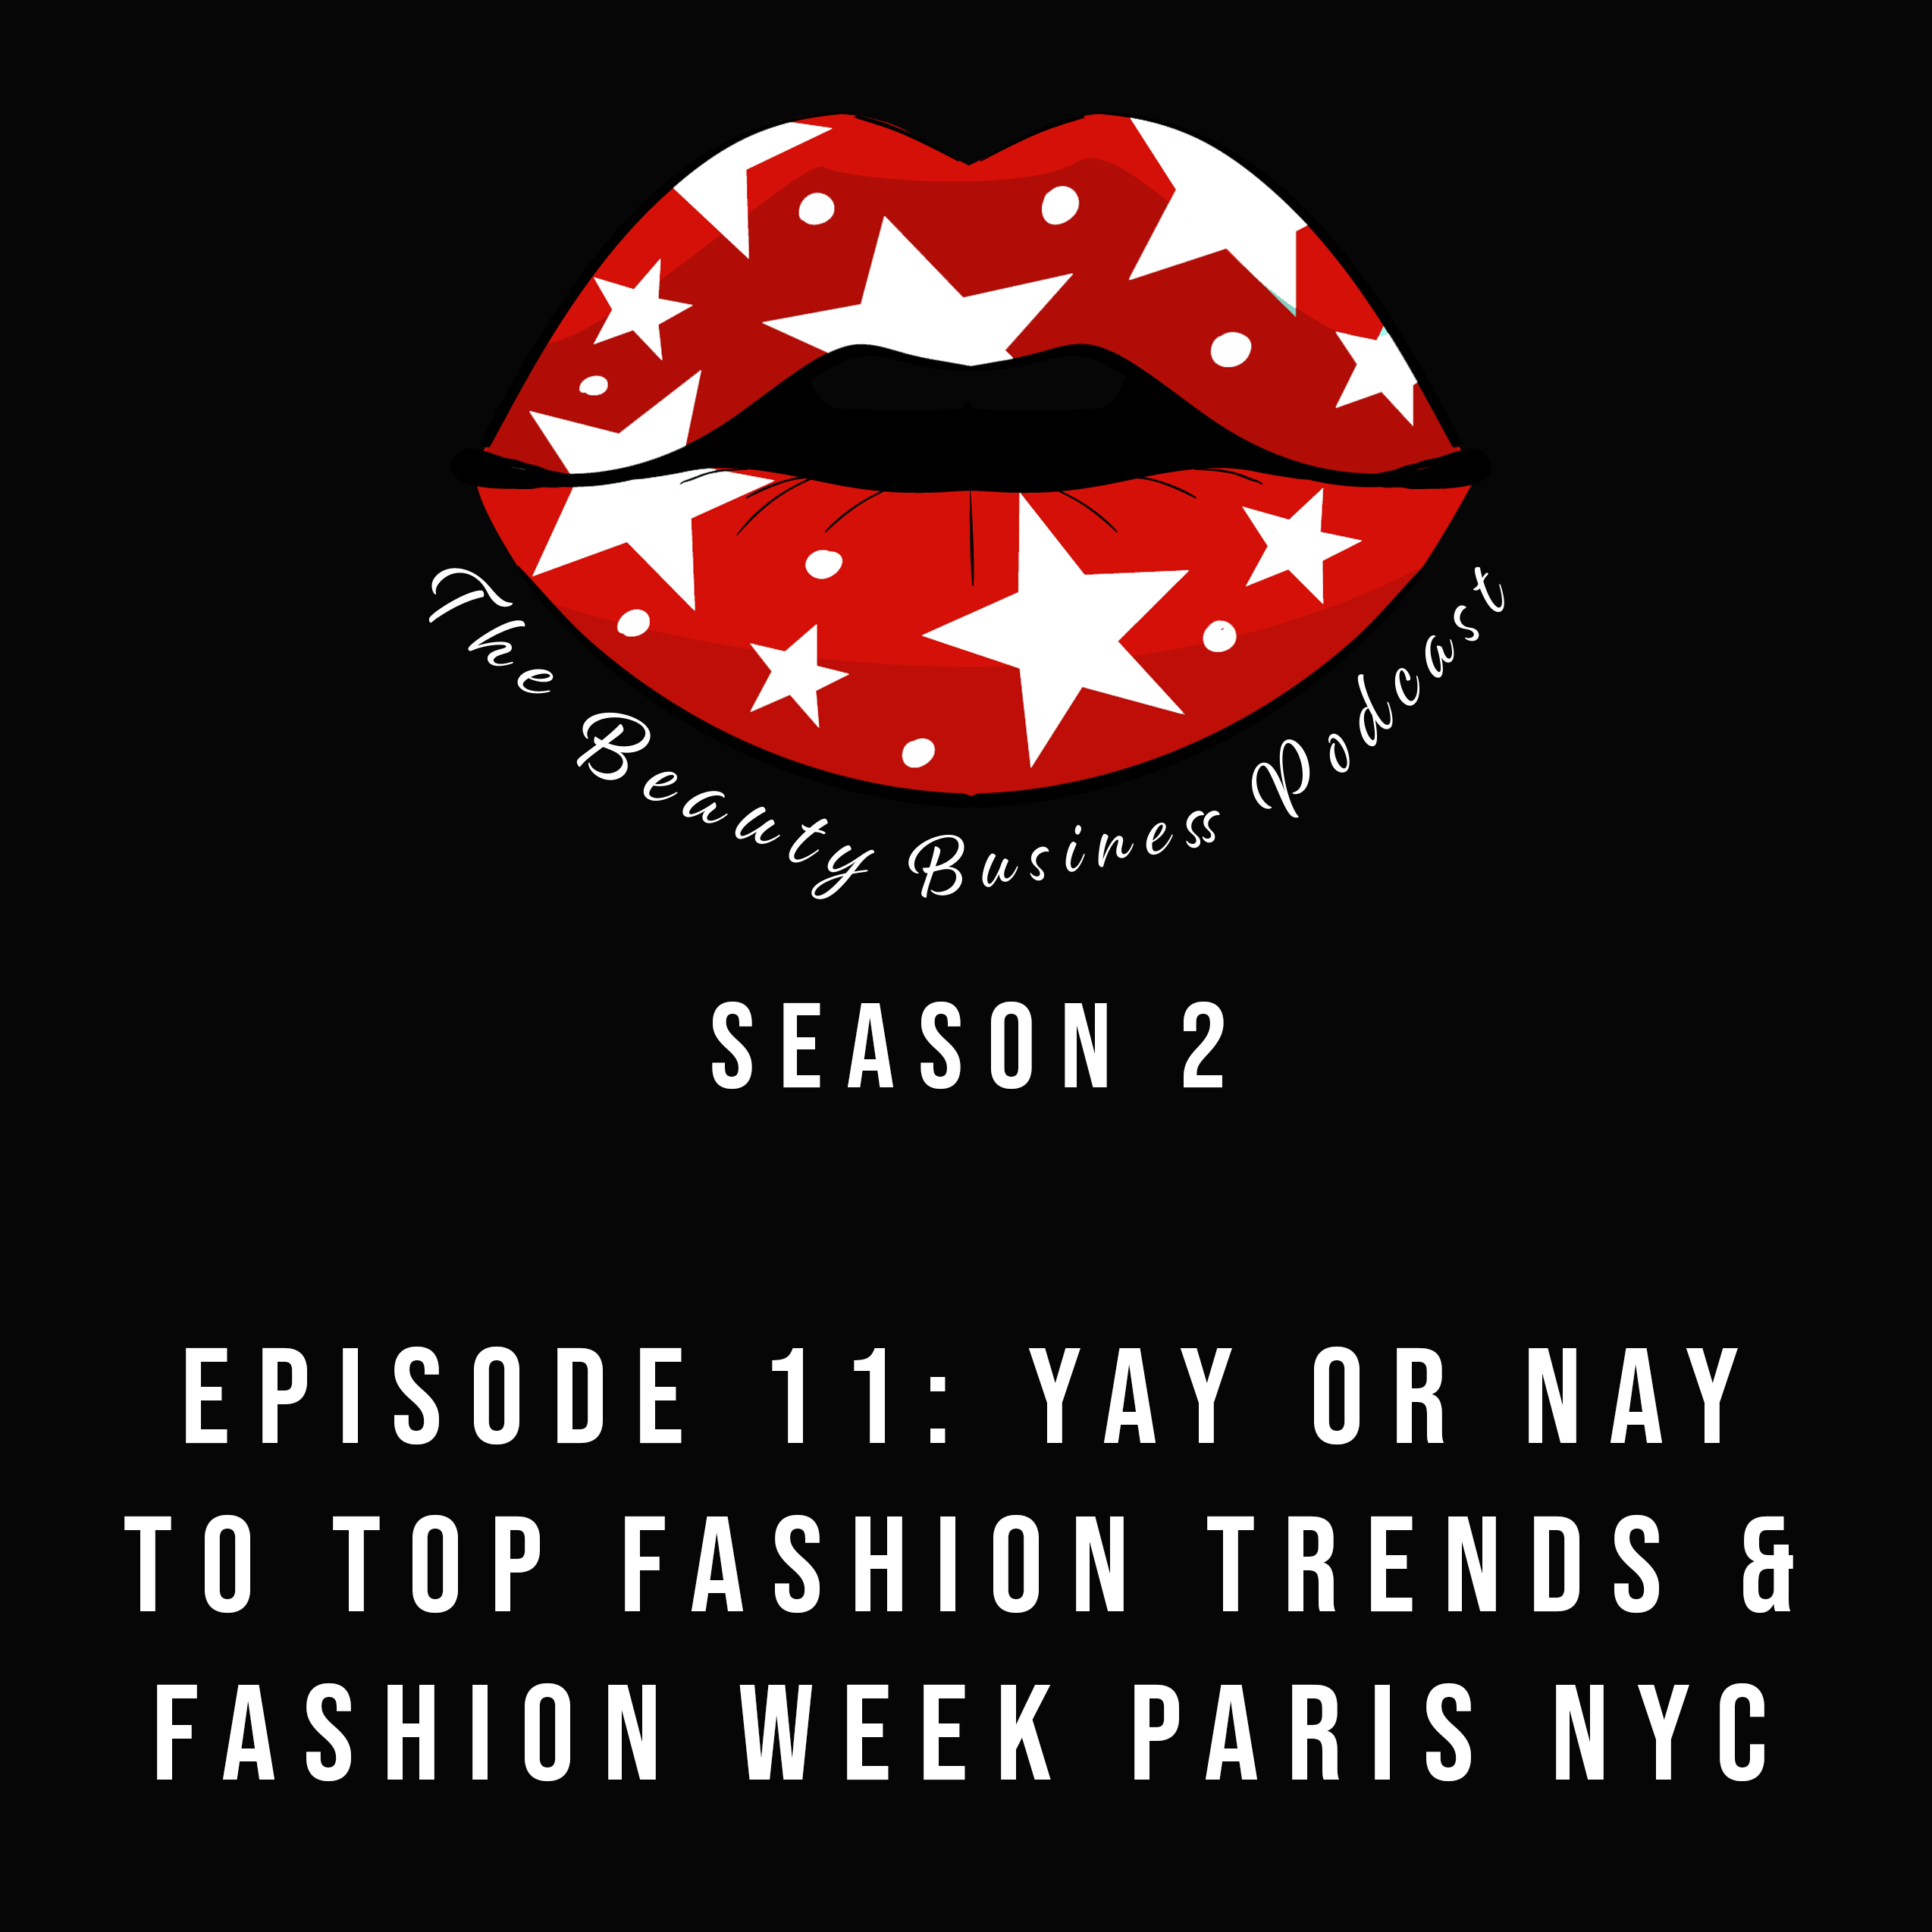 Season 2: Episode 11 - Yay or Nay to Top Fashion Trends